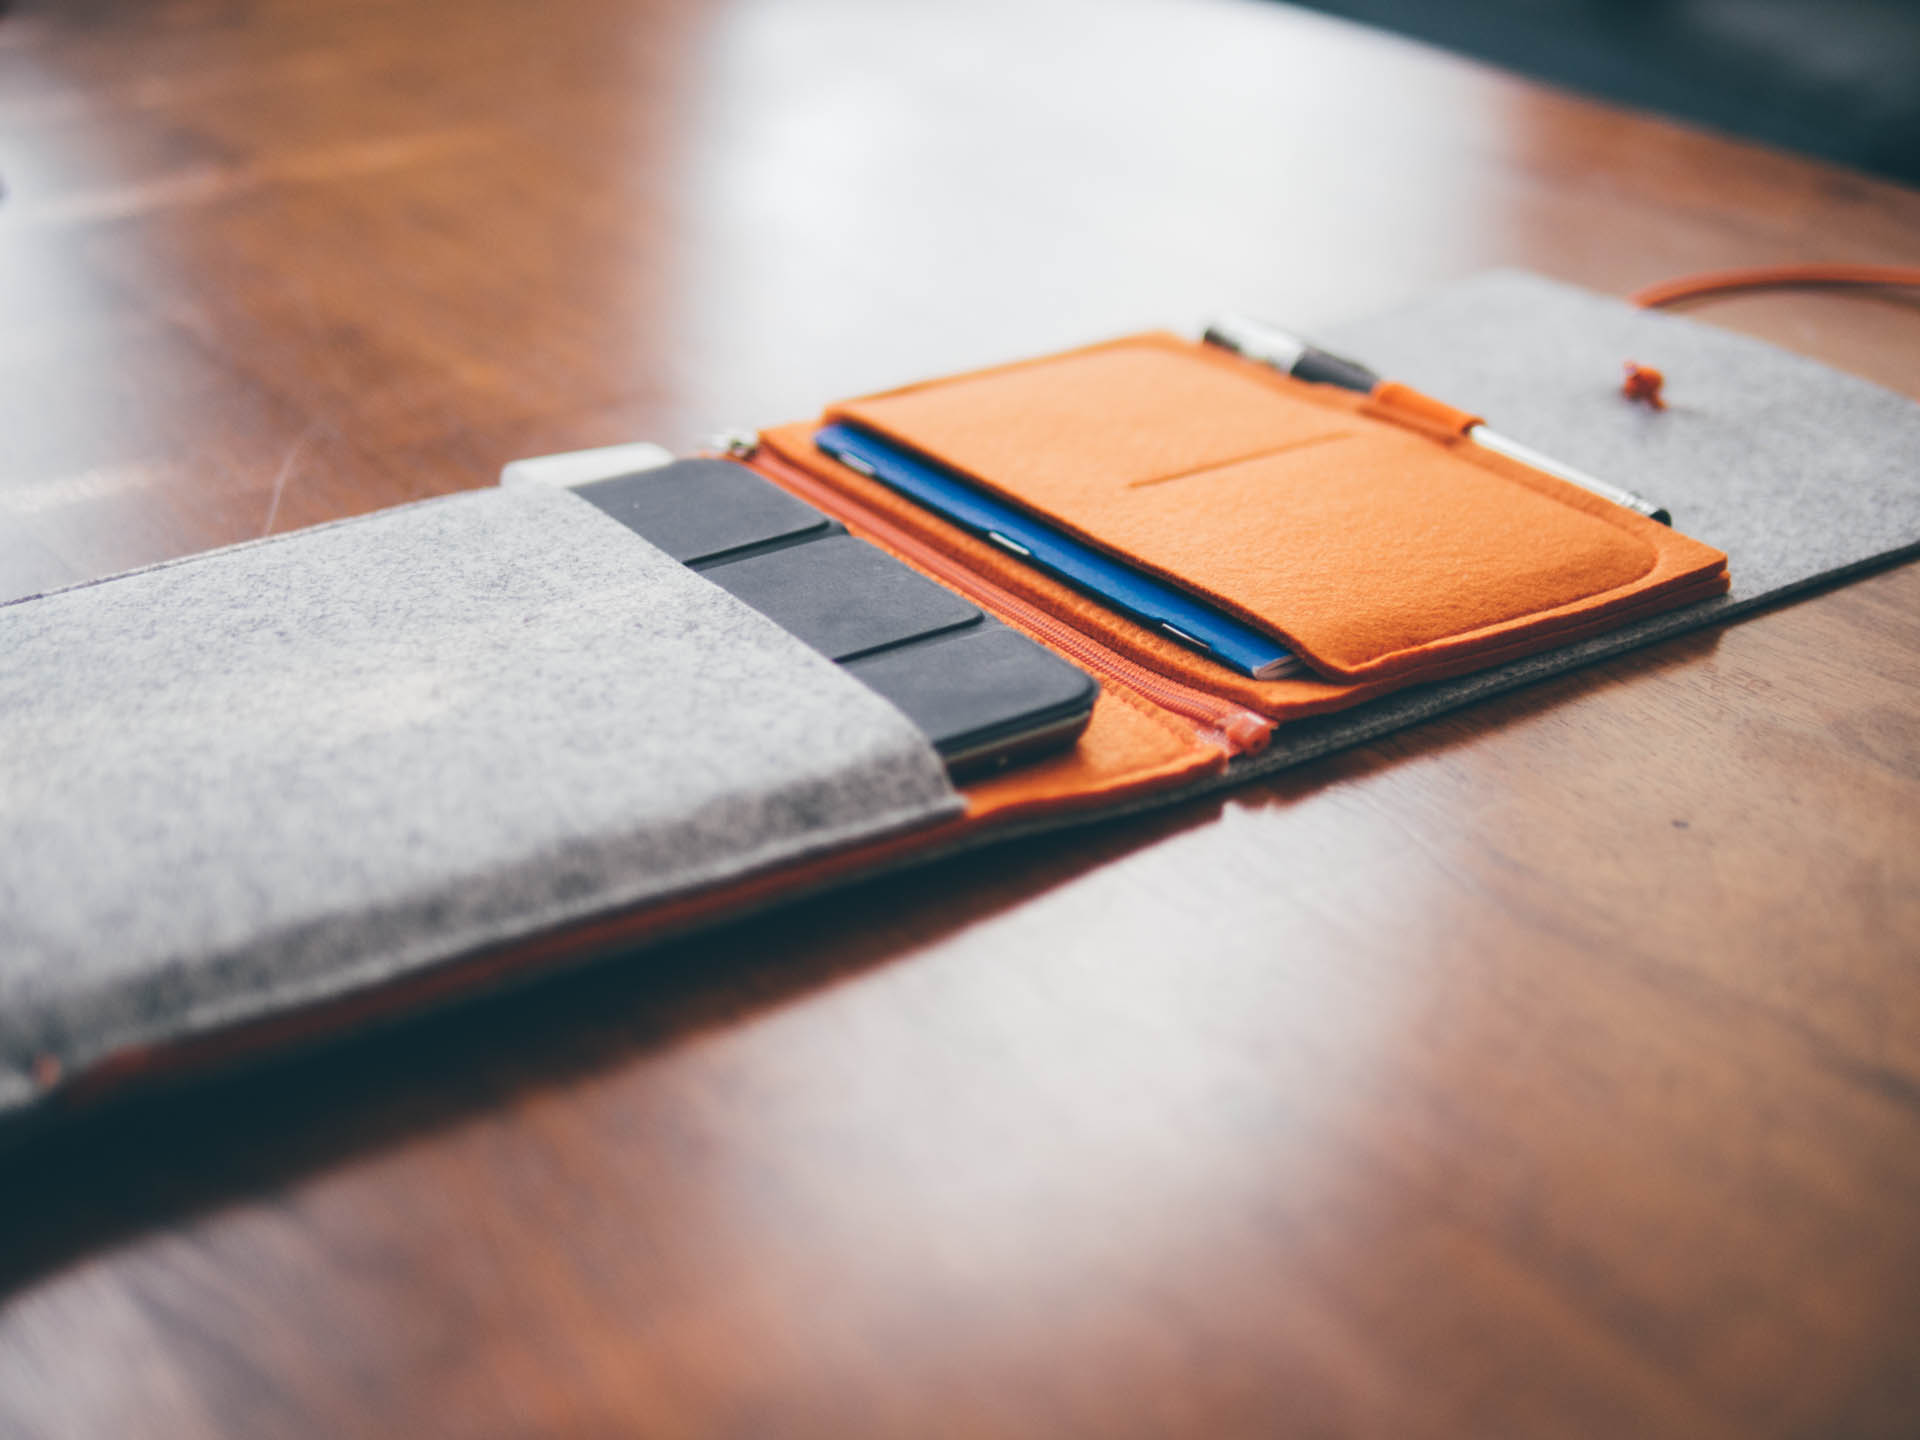 The Felt Case mini is a simple, sleeve-style case for the iPad. It'll fit an iPad mini with or without a Smart cover, and it has a cool (removable) analog pouch that'll fit a Field Notes-sized notebook and a pen or pencil.